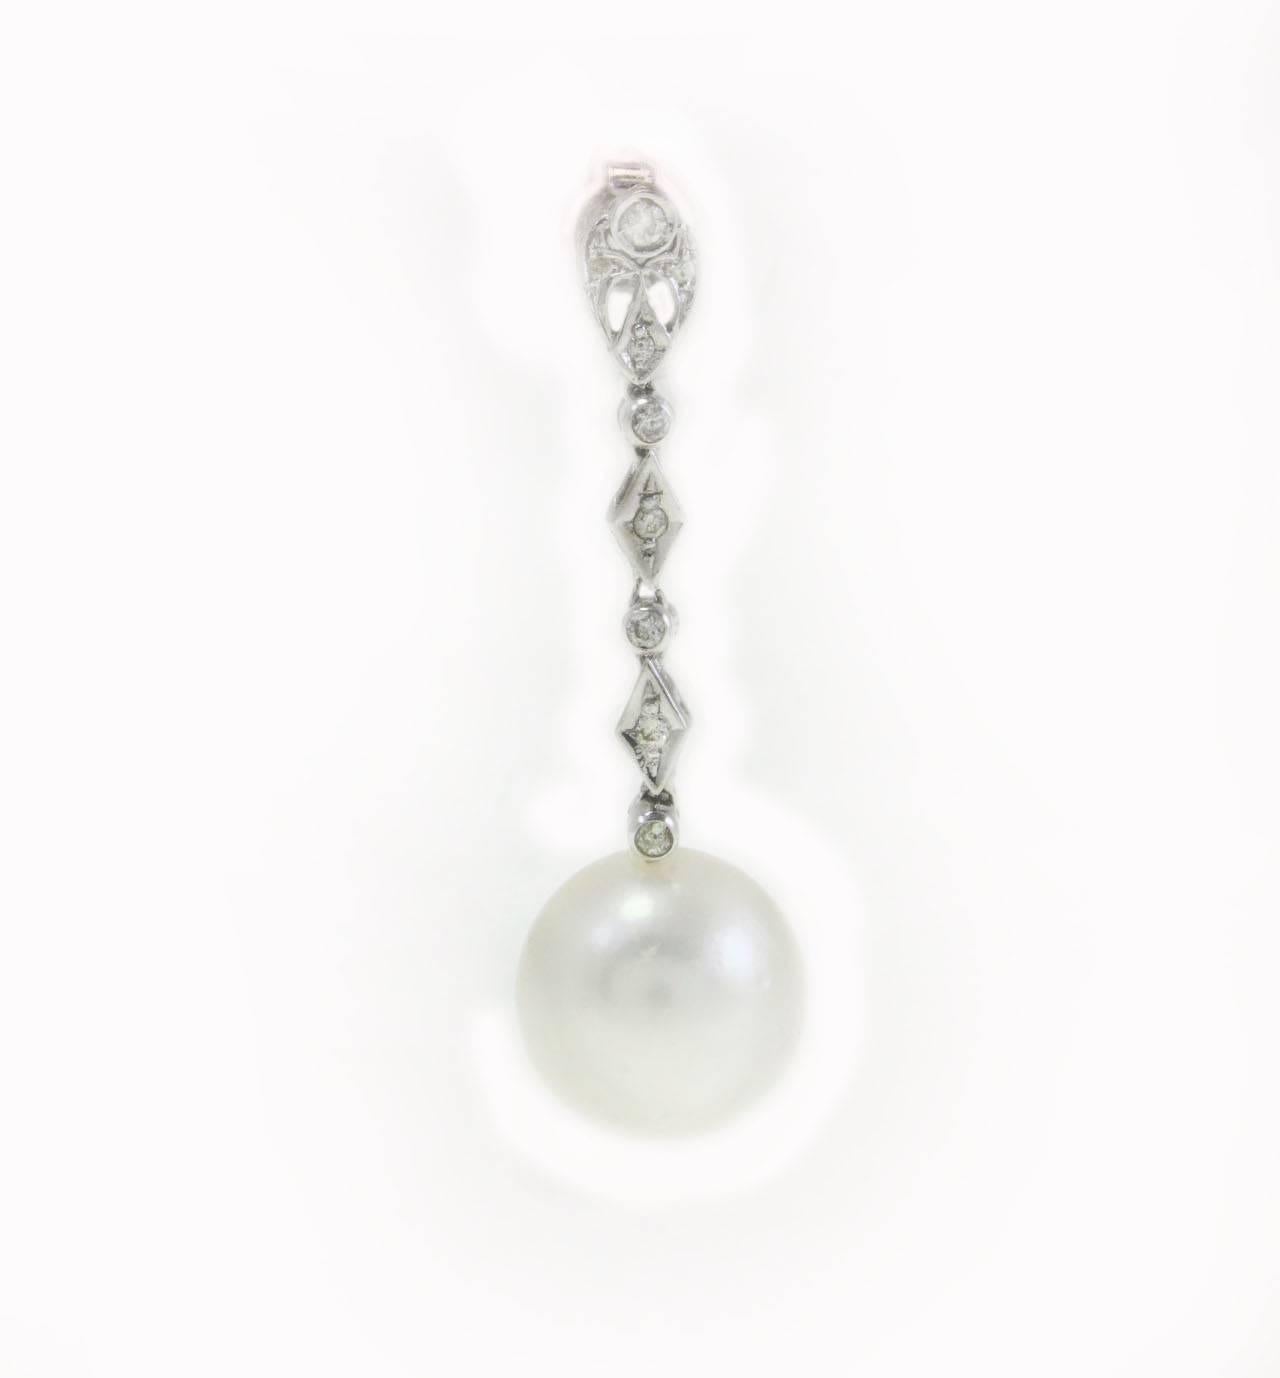 Dangle earrings in a 14Kt white gold composed of a chain of diamonds with a medium size pearl at the end of it. These are delightful pairs of earrings that you will not resist to wear in any occasion.

diamonds(0.45Kt)
pearls (7.90gr) 
tot weight